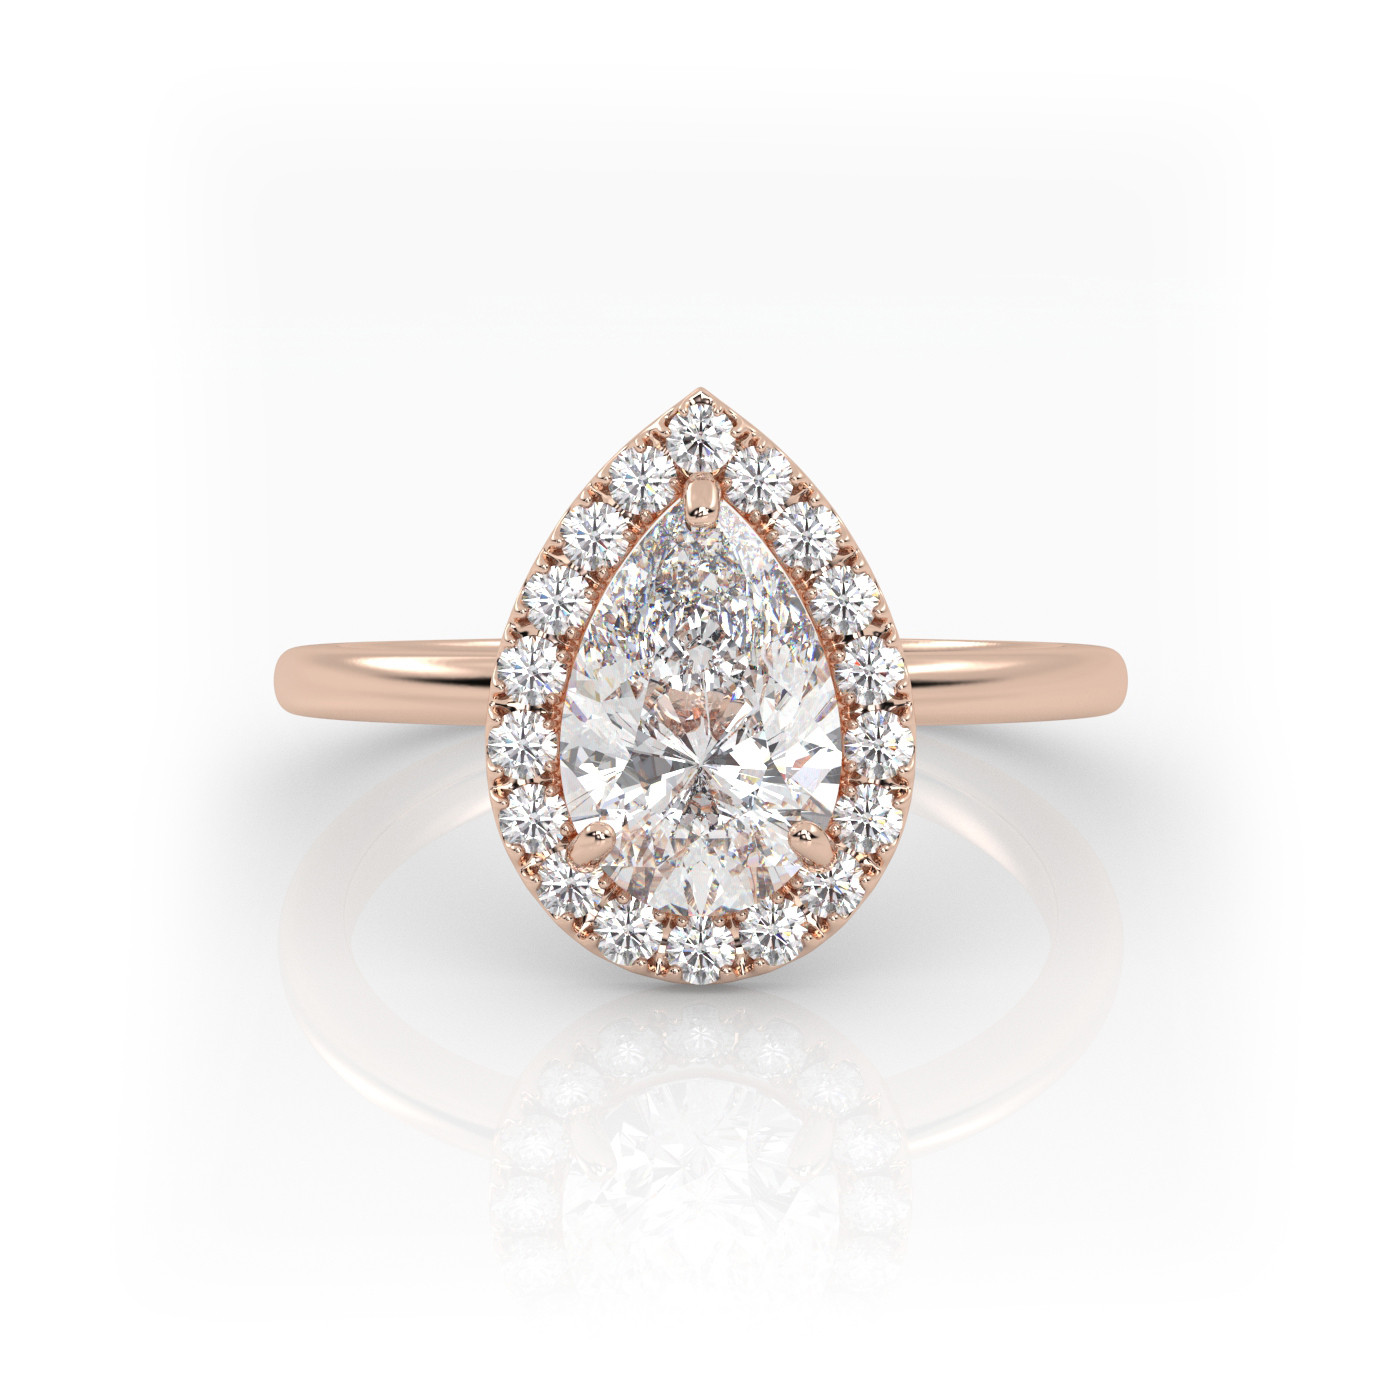 18K ROSE GOLD Pear Diamond Cut Engagement Ring with Halo Style